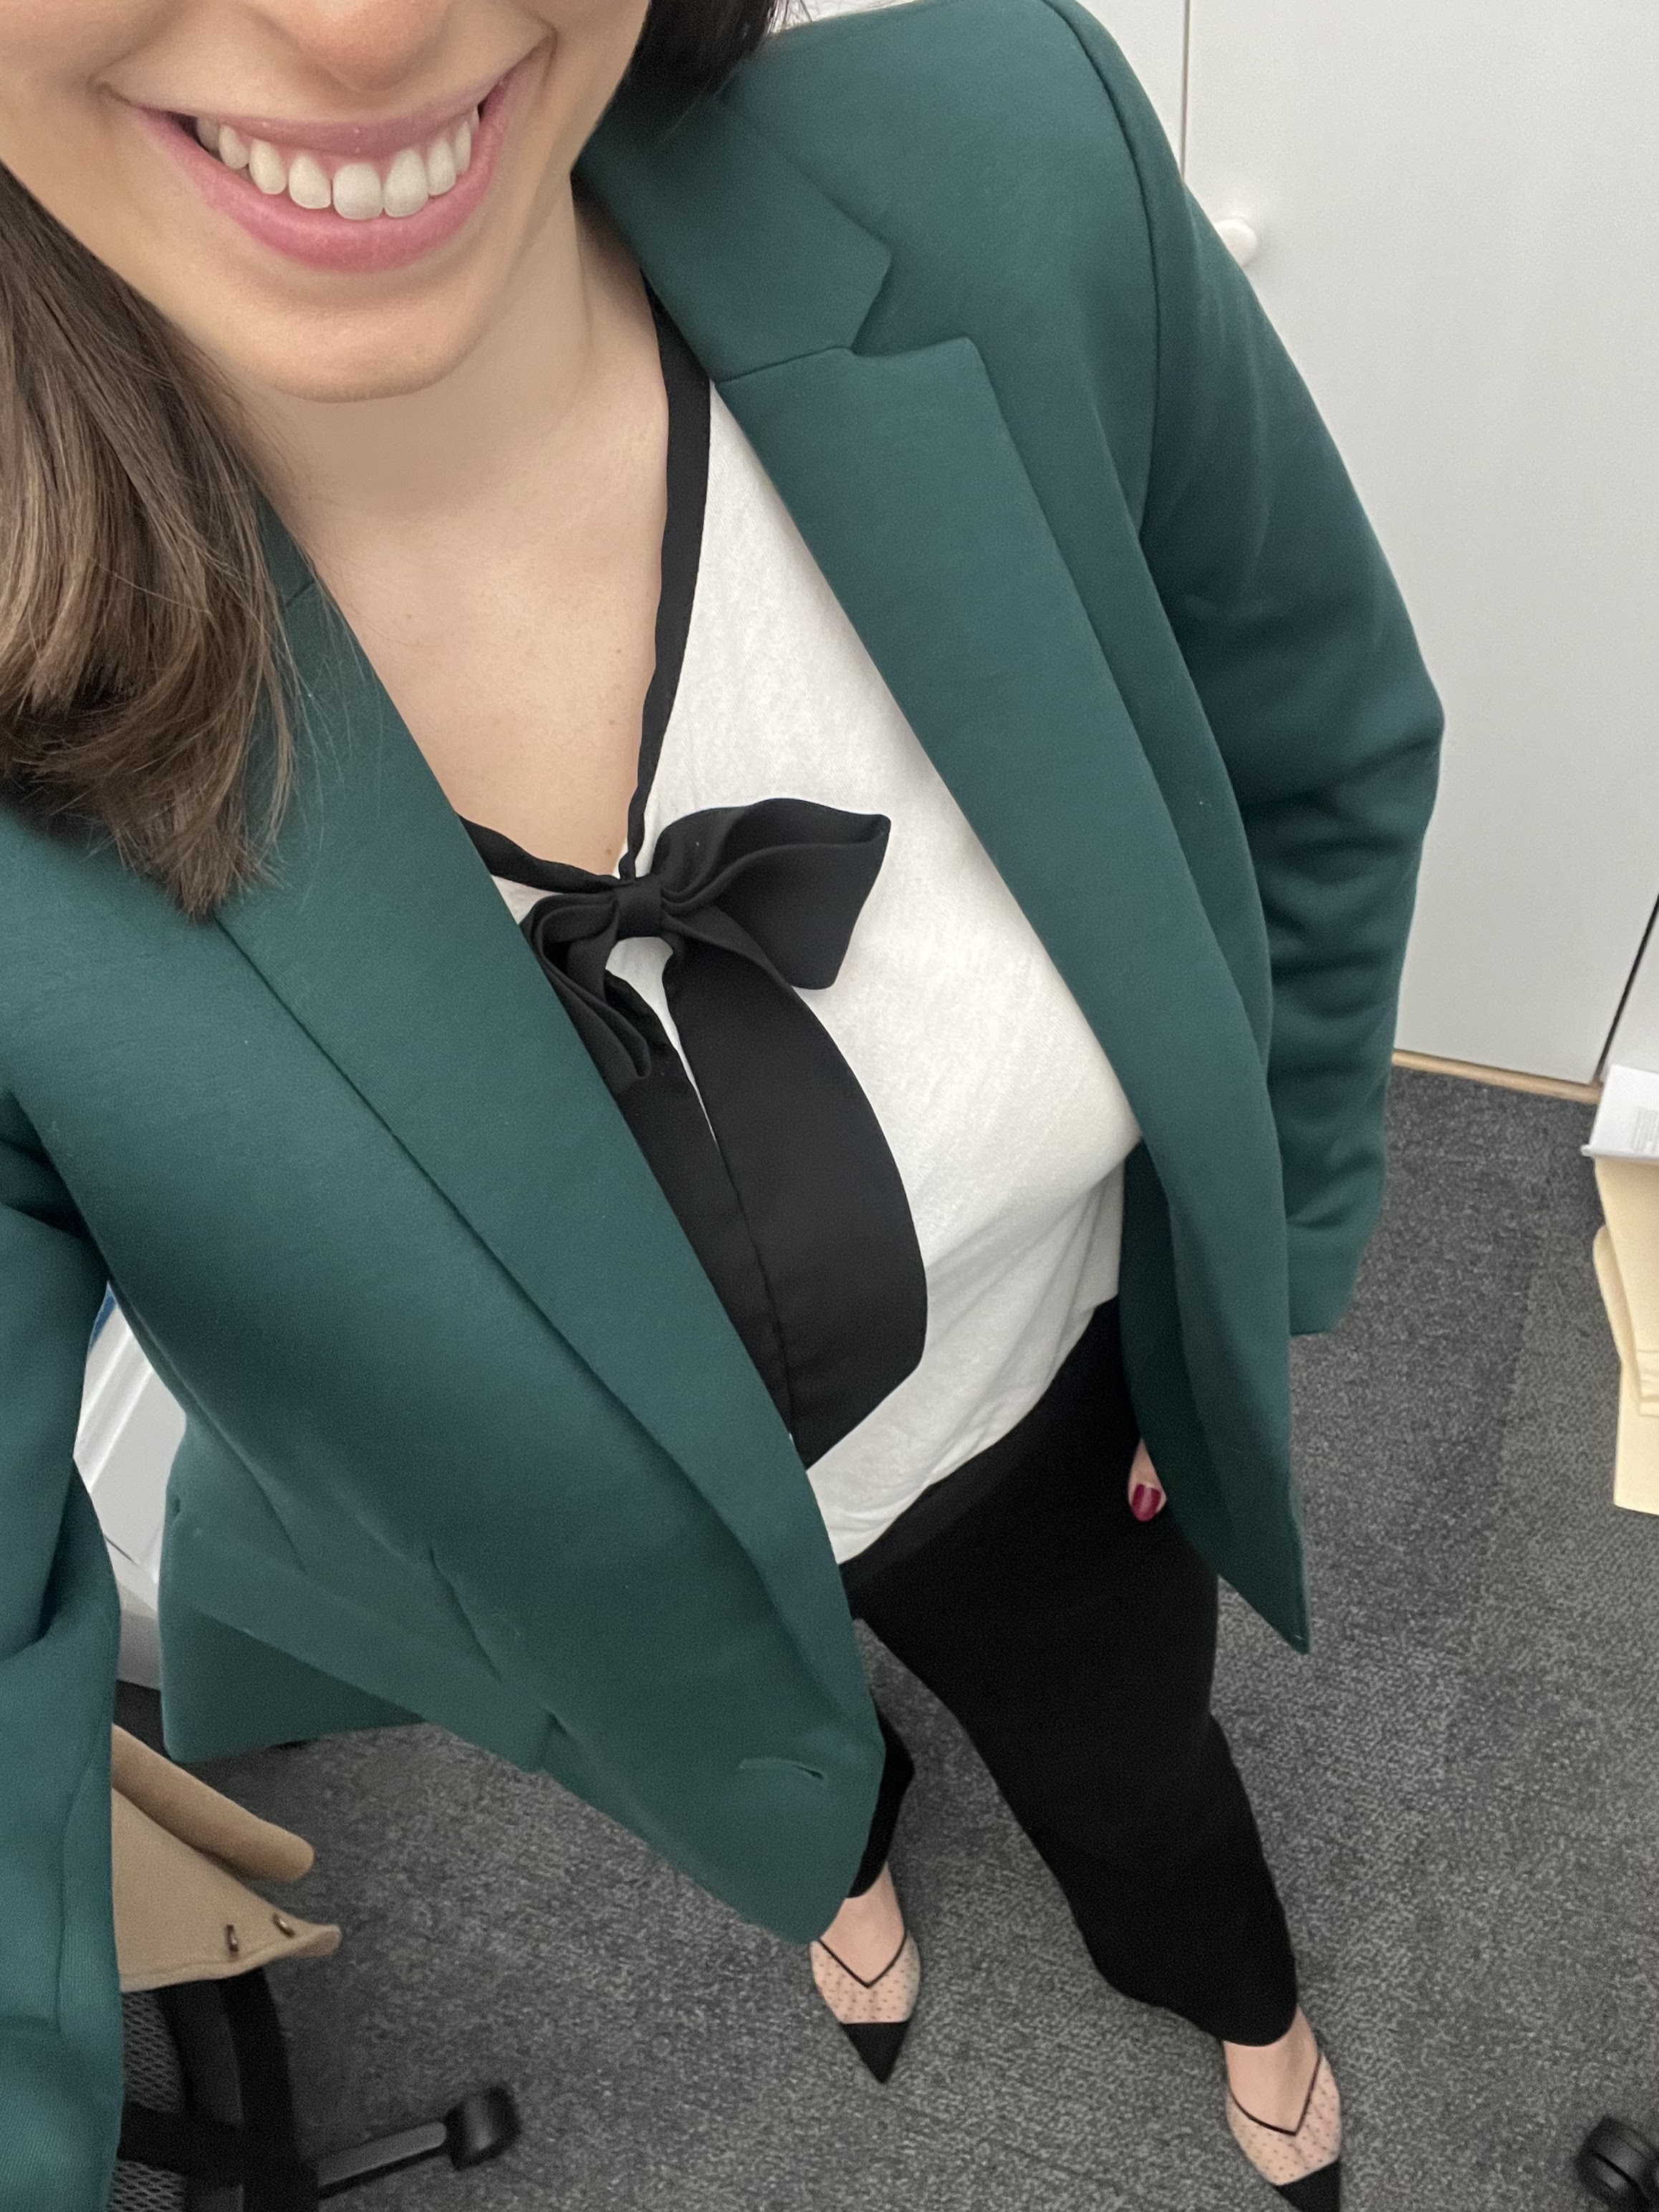 winter workwear, ann taylor, suiting, green suit, green suit blazer, office style, workwear, business casual, winter workwear, office style, suiting